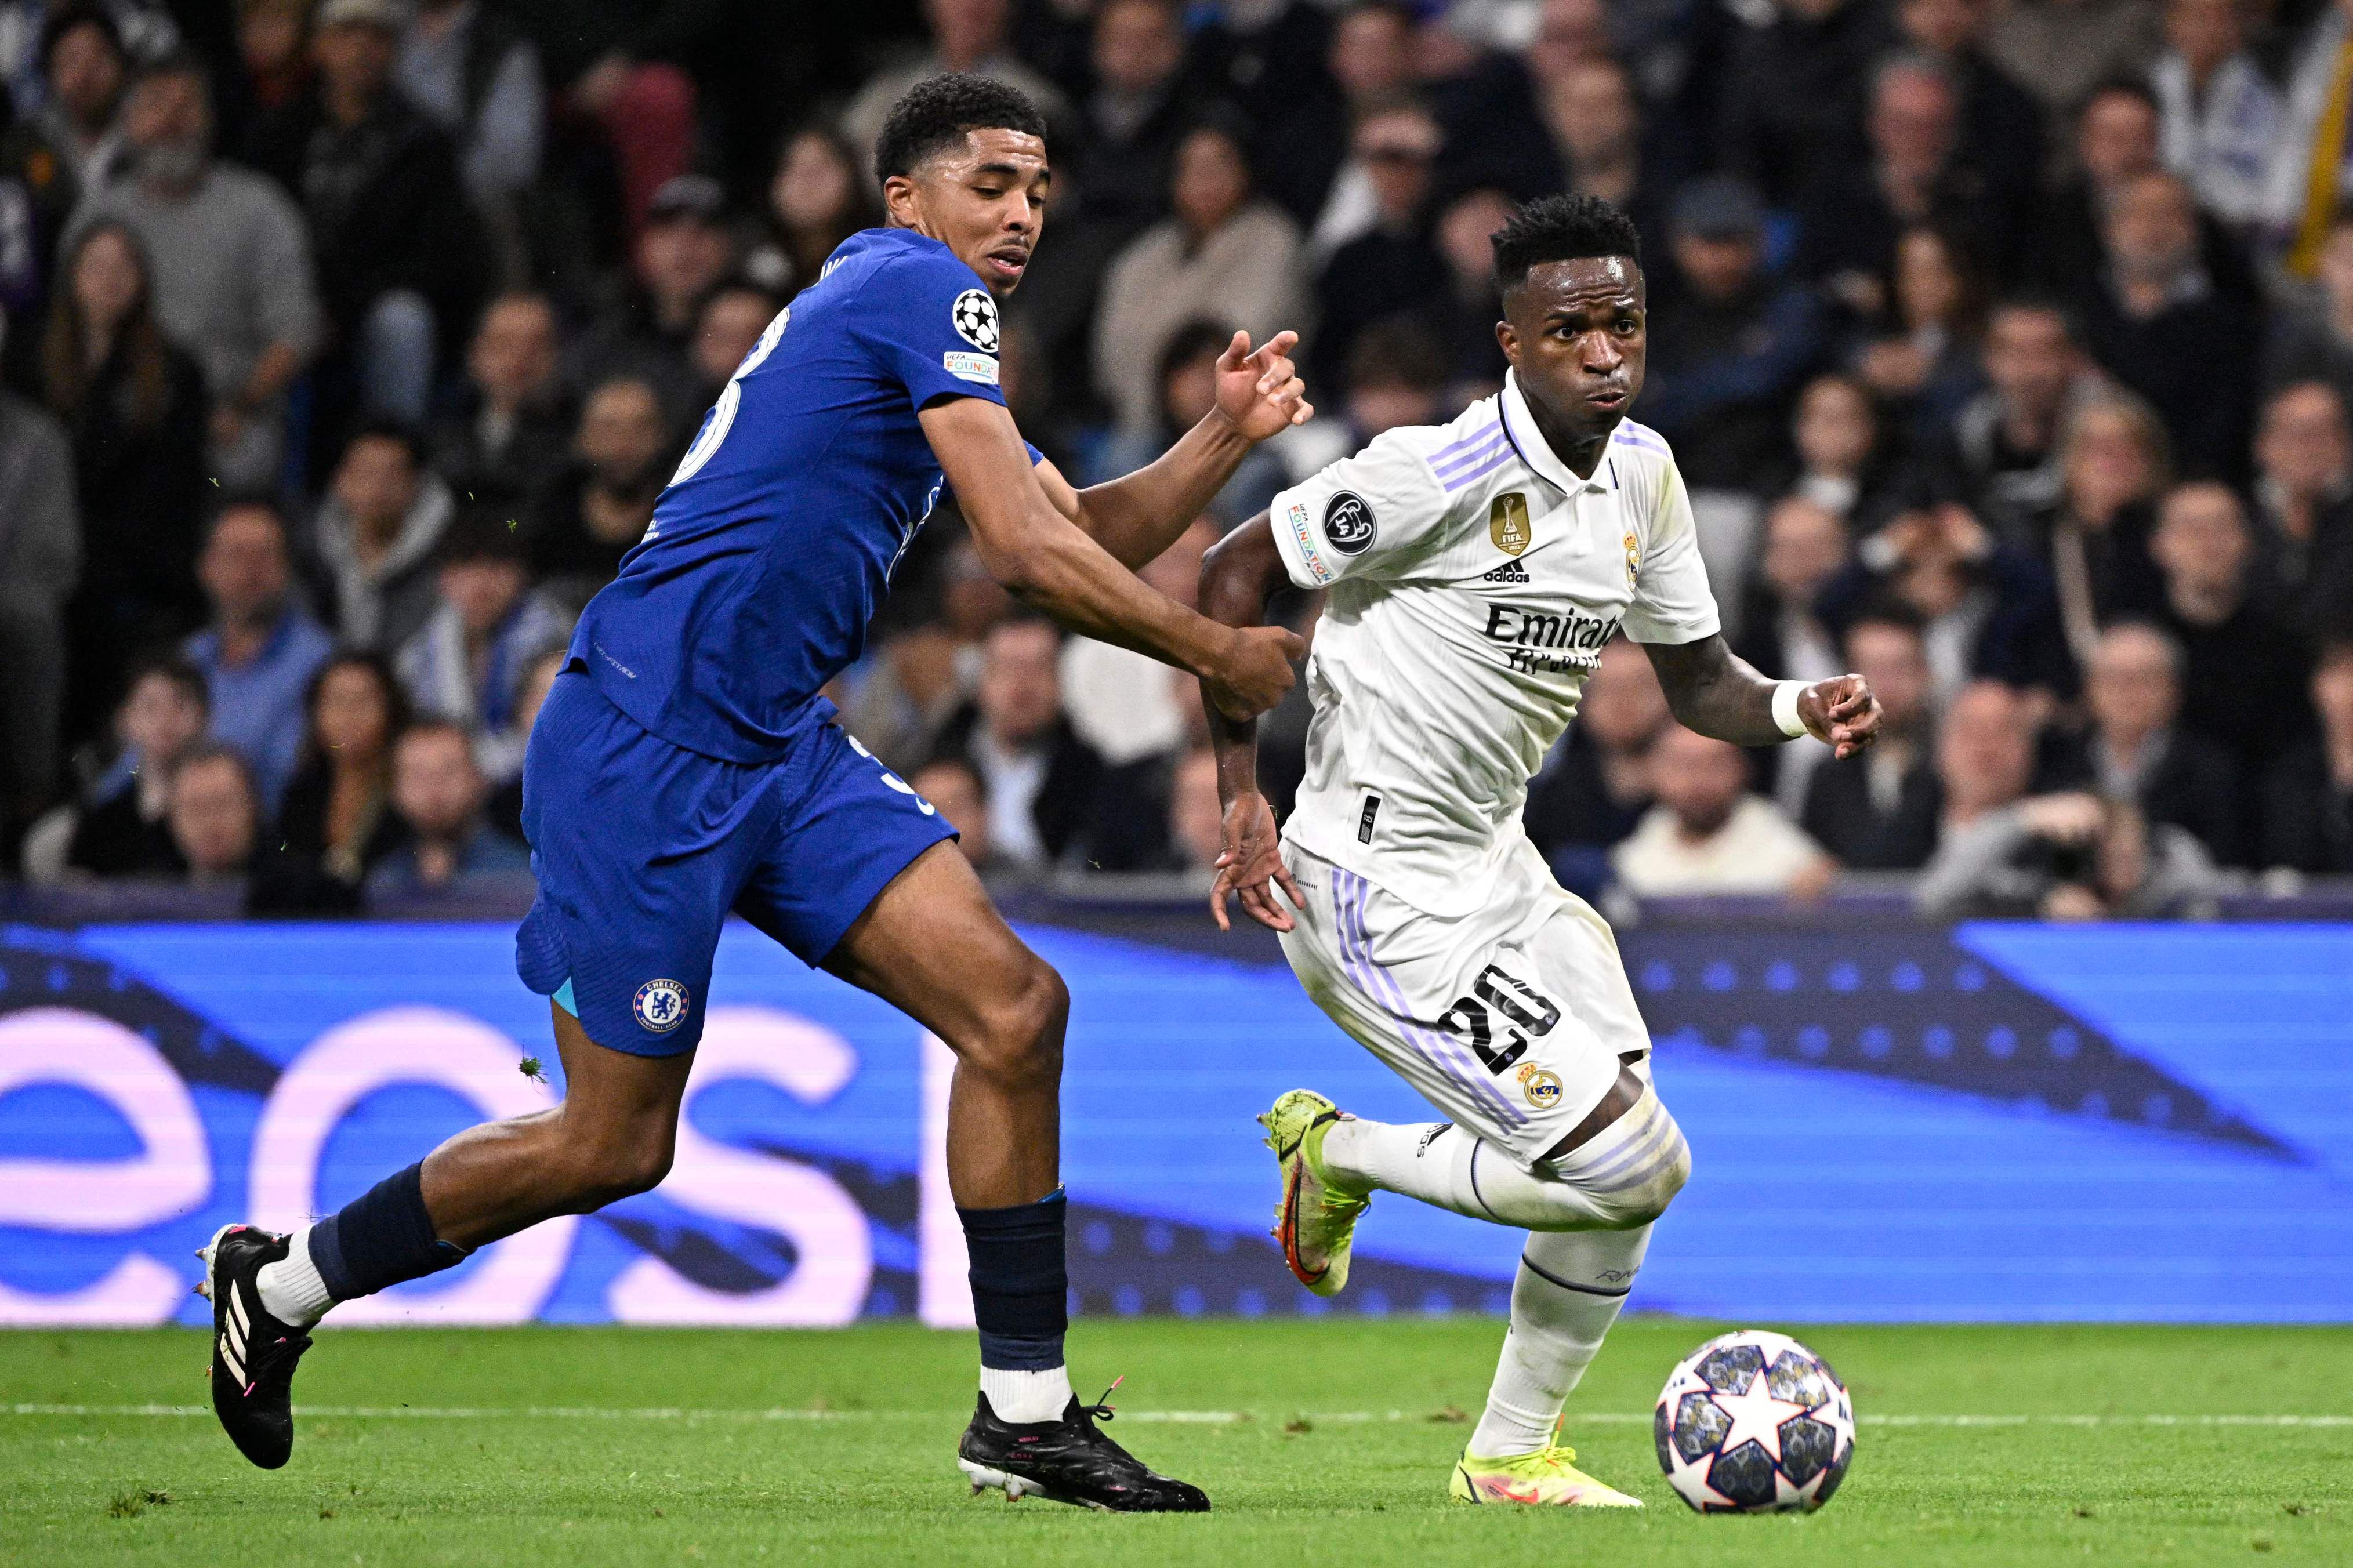 Chelsea - Real Madrid summary: Rodrygo double, score, goals, highlights,  Champions League quarter-final 22/23 - AS USA